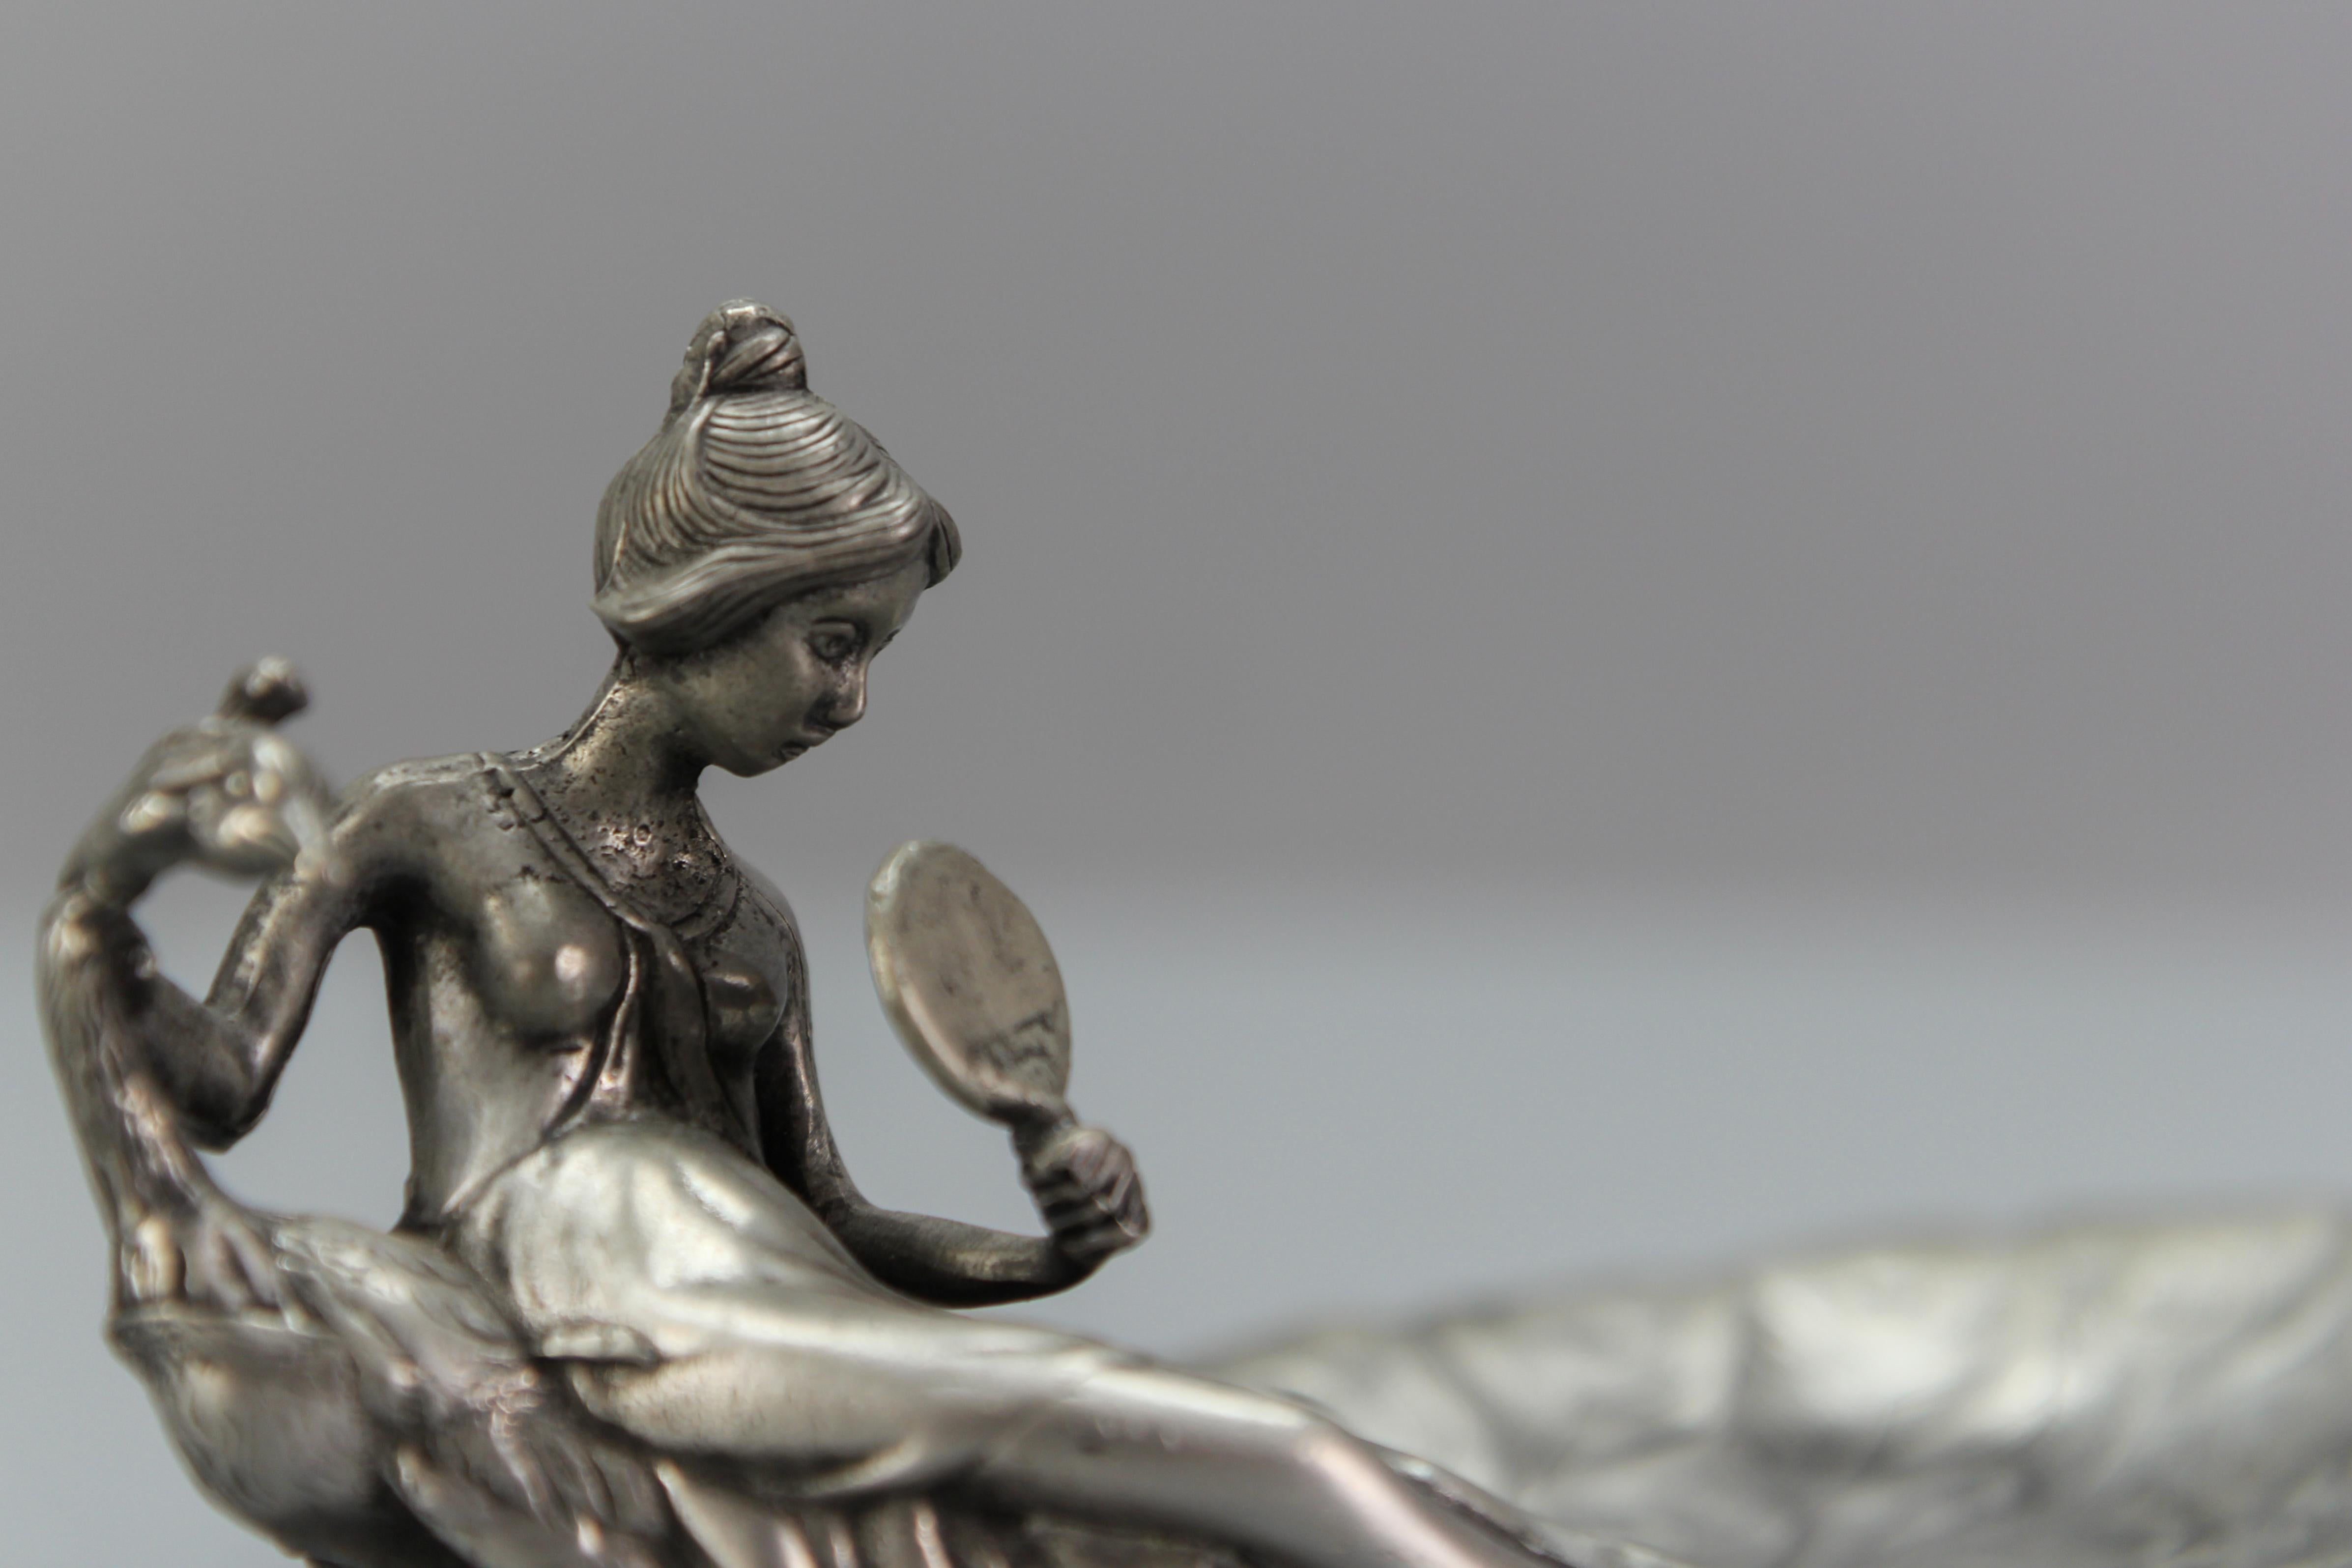 Mid-20th Century French Art Nouveau Style Pewter Vide - Poche or Pin Tray a Lady with a Peacock For Sale